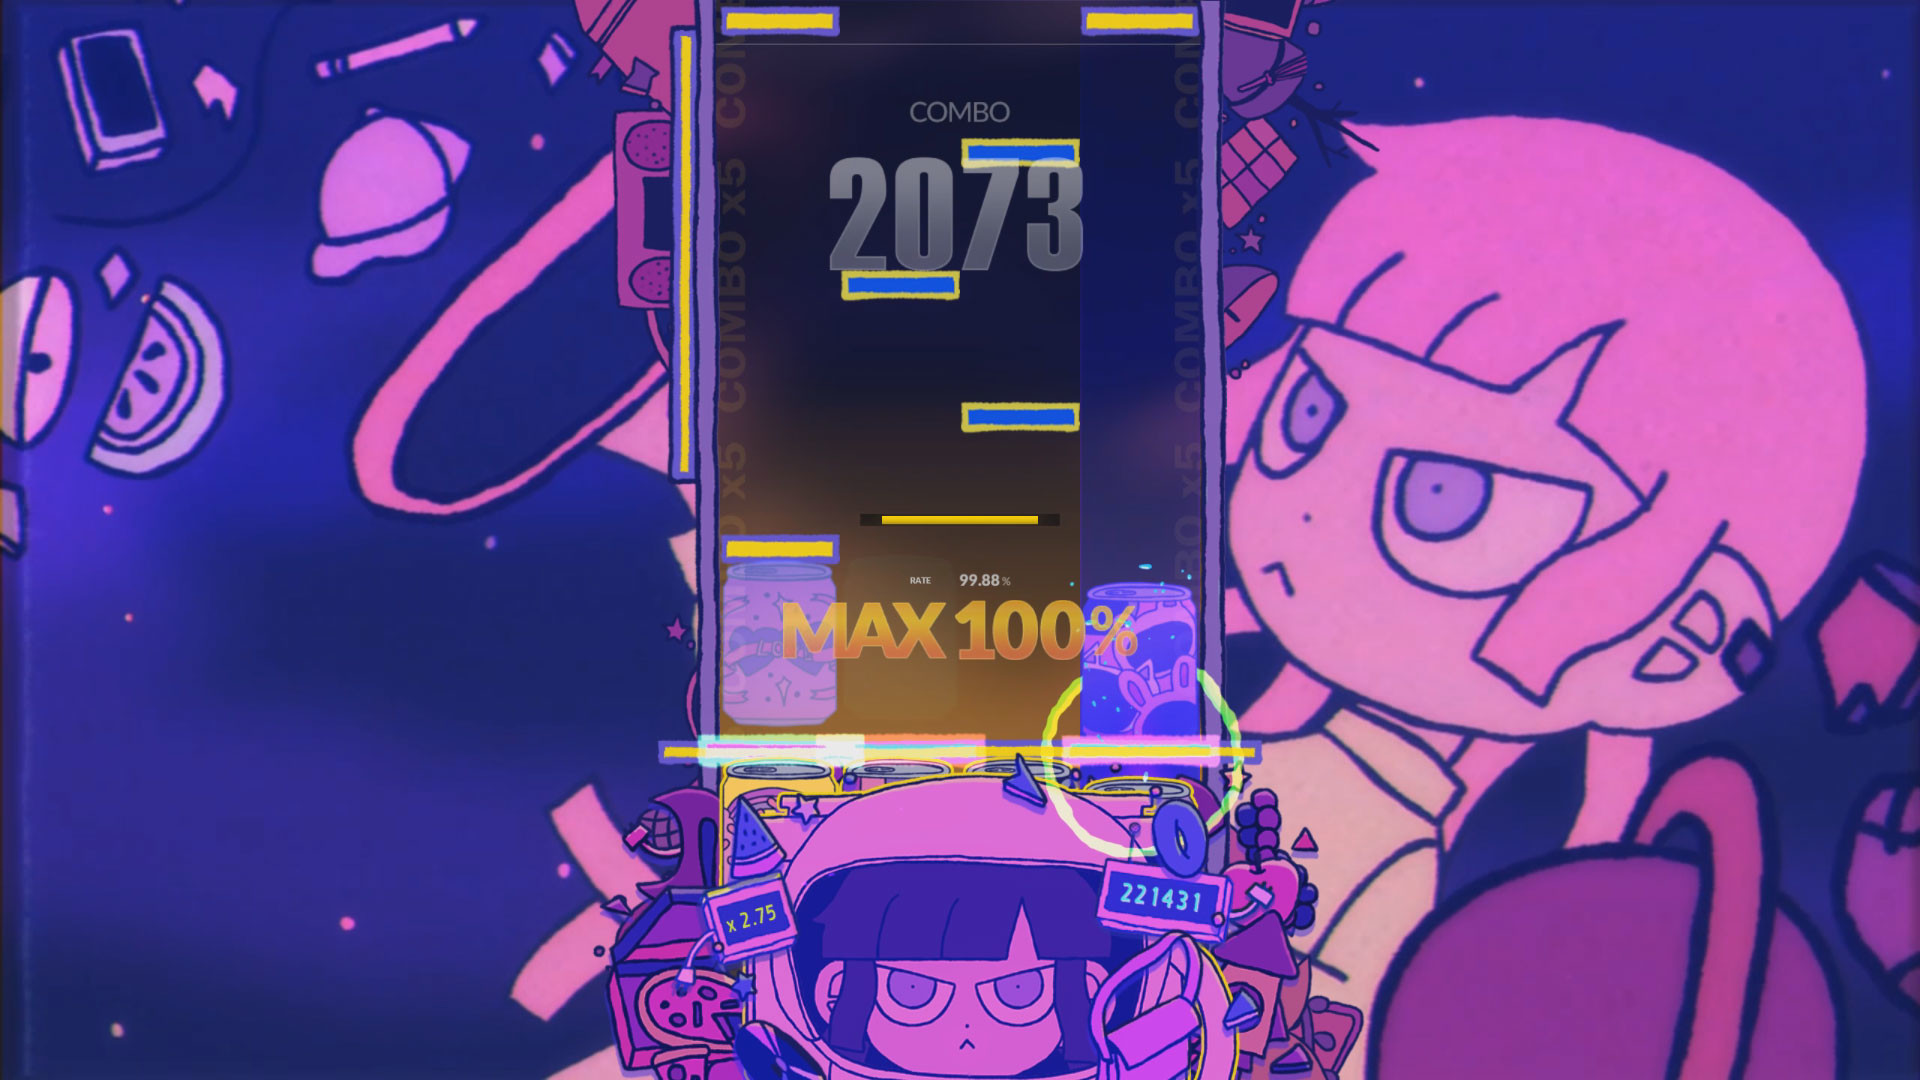 DJMAX RESPECT V - Welcome to the Space GEAR PACK | WW (fdfe0ad1-6b3f-4526-b940-97383ea3a927)